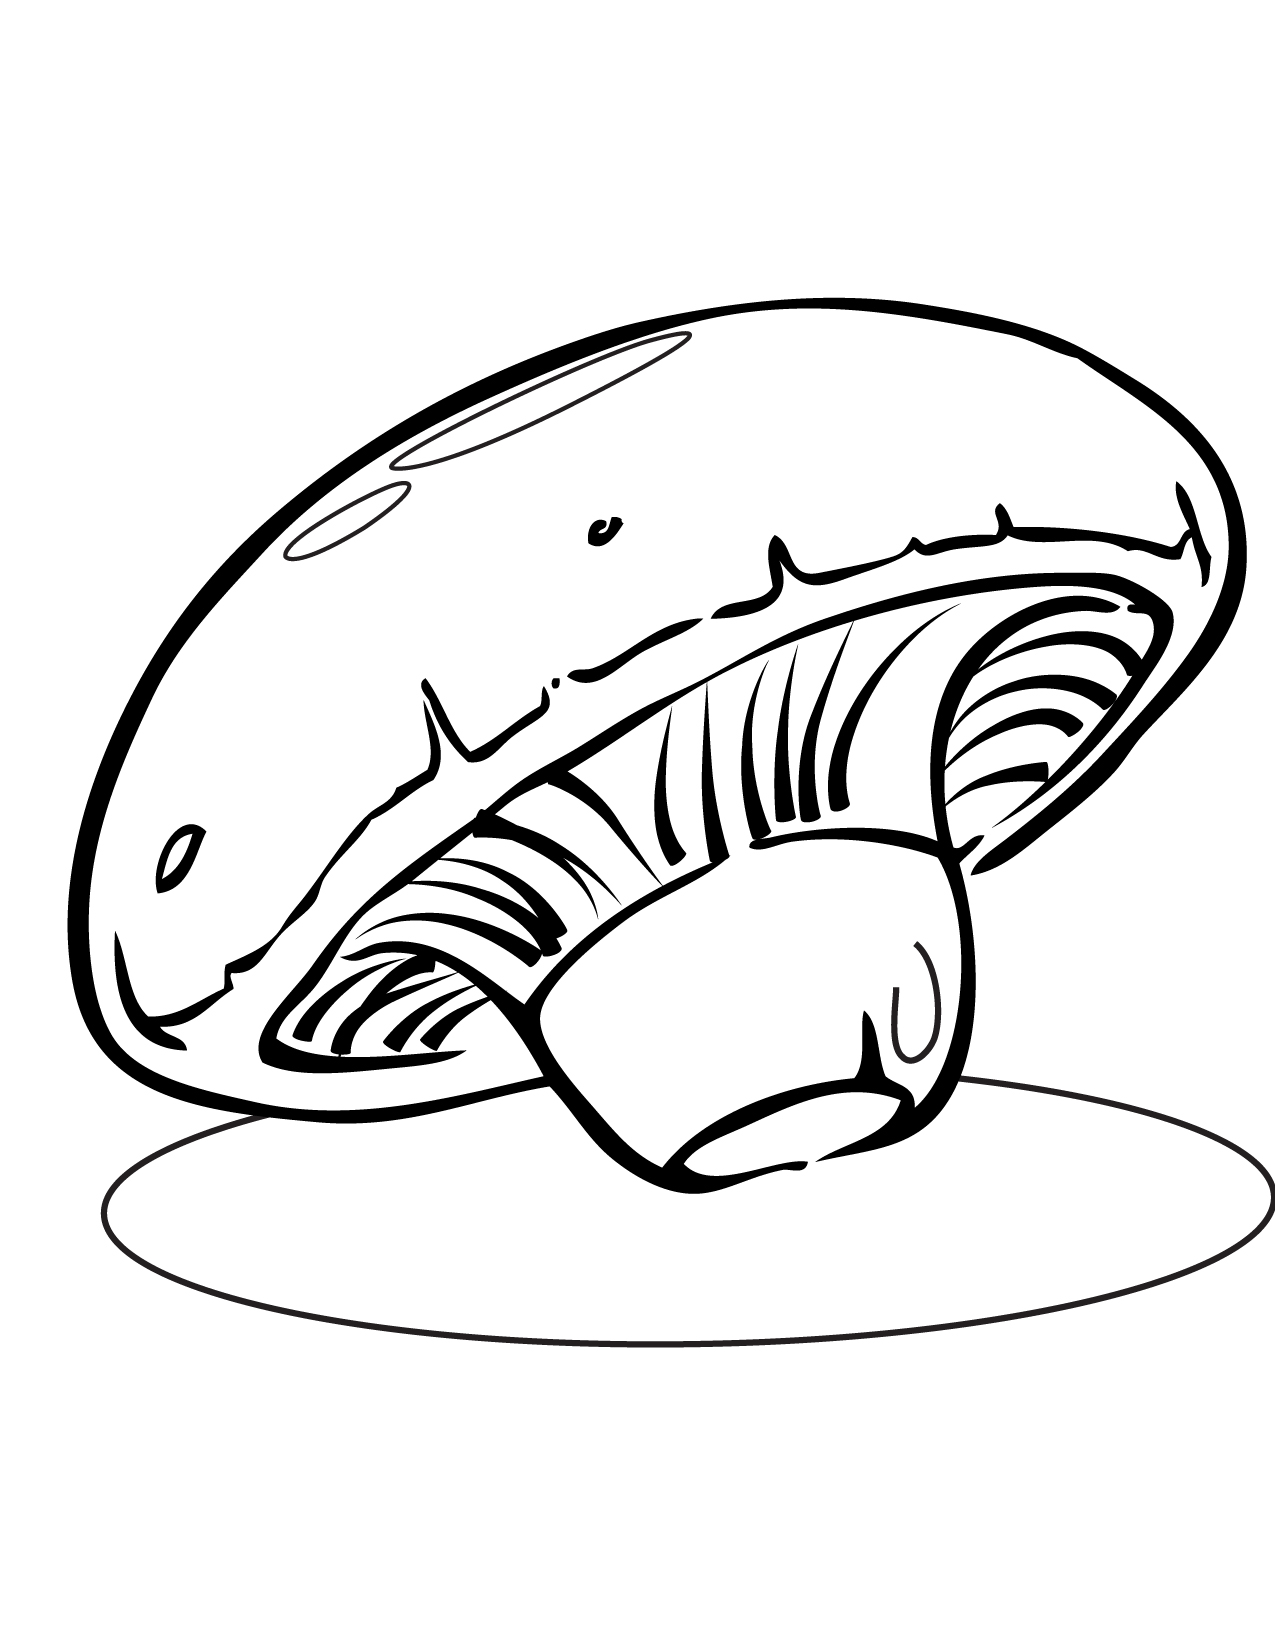 Zentangle Mushroom Coloring Pages